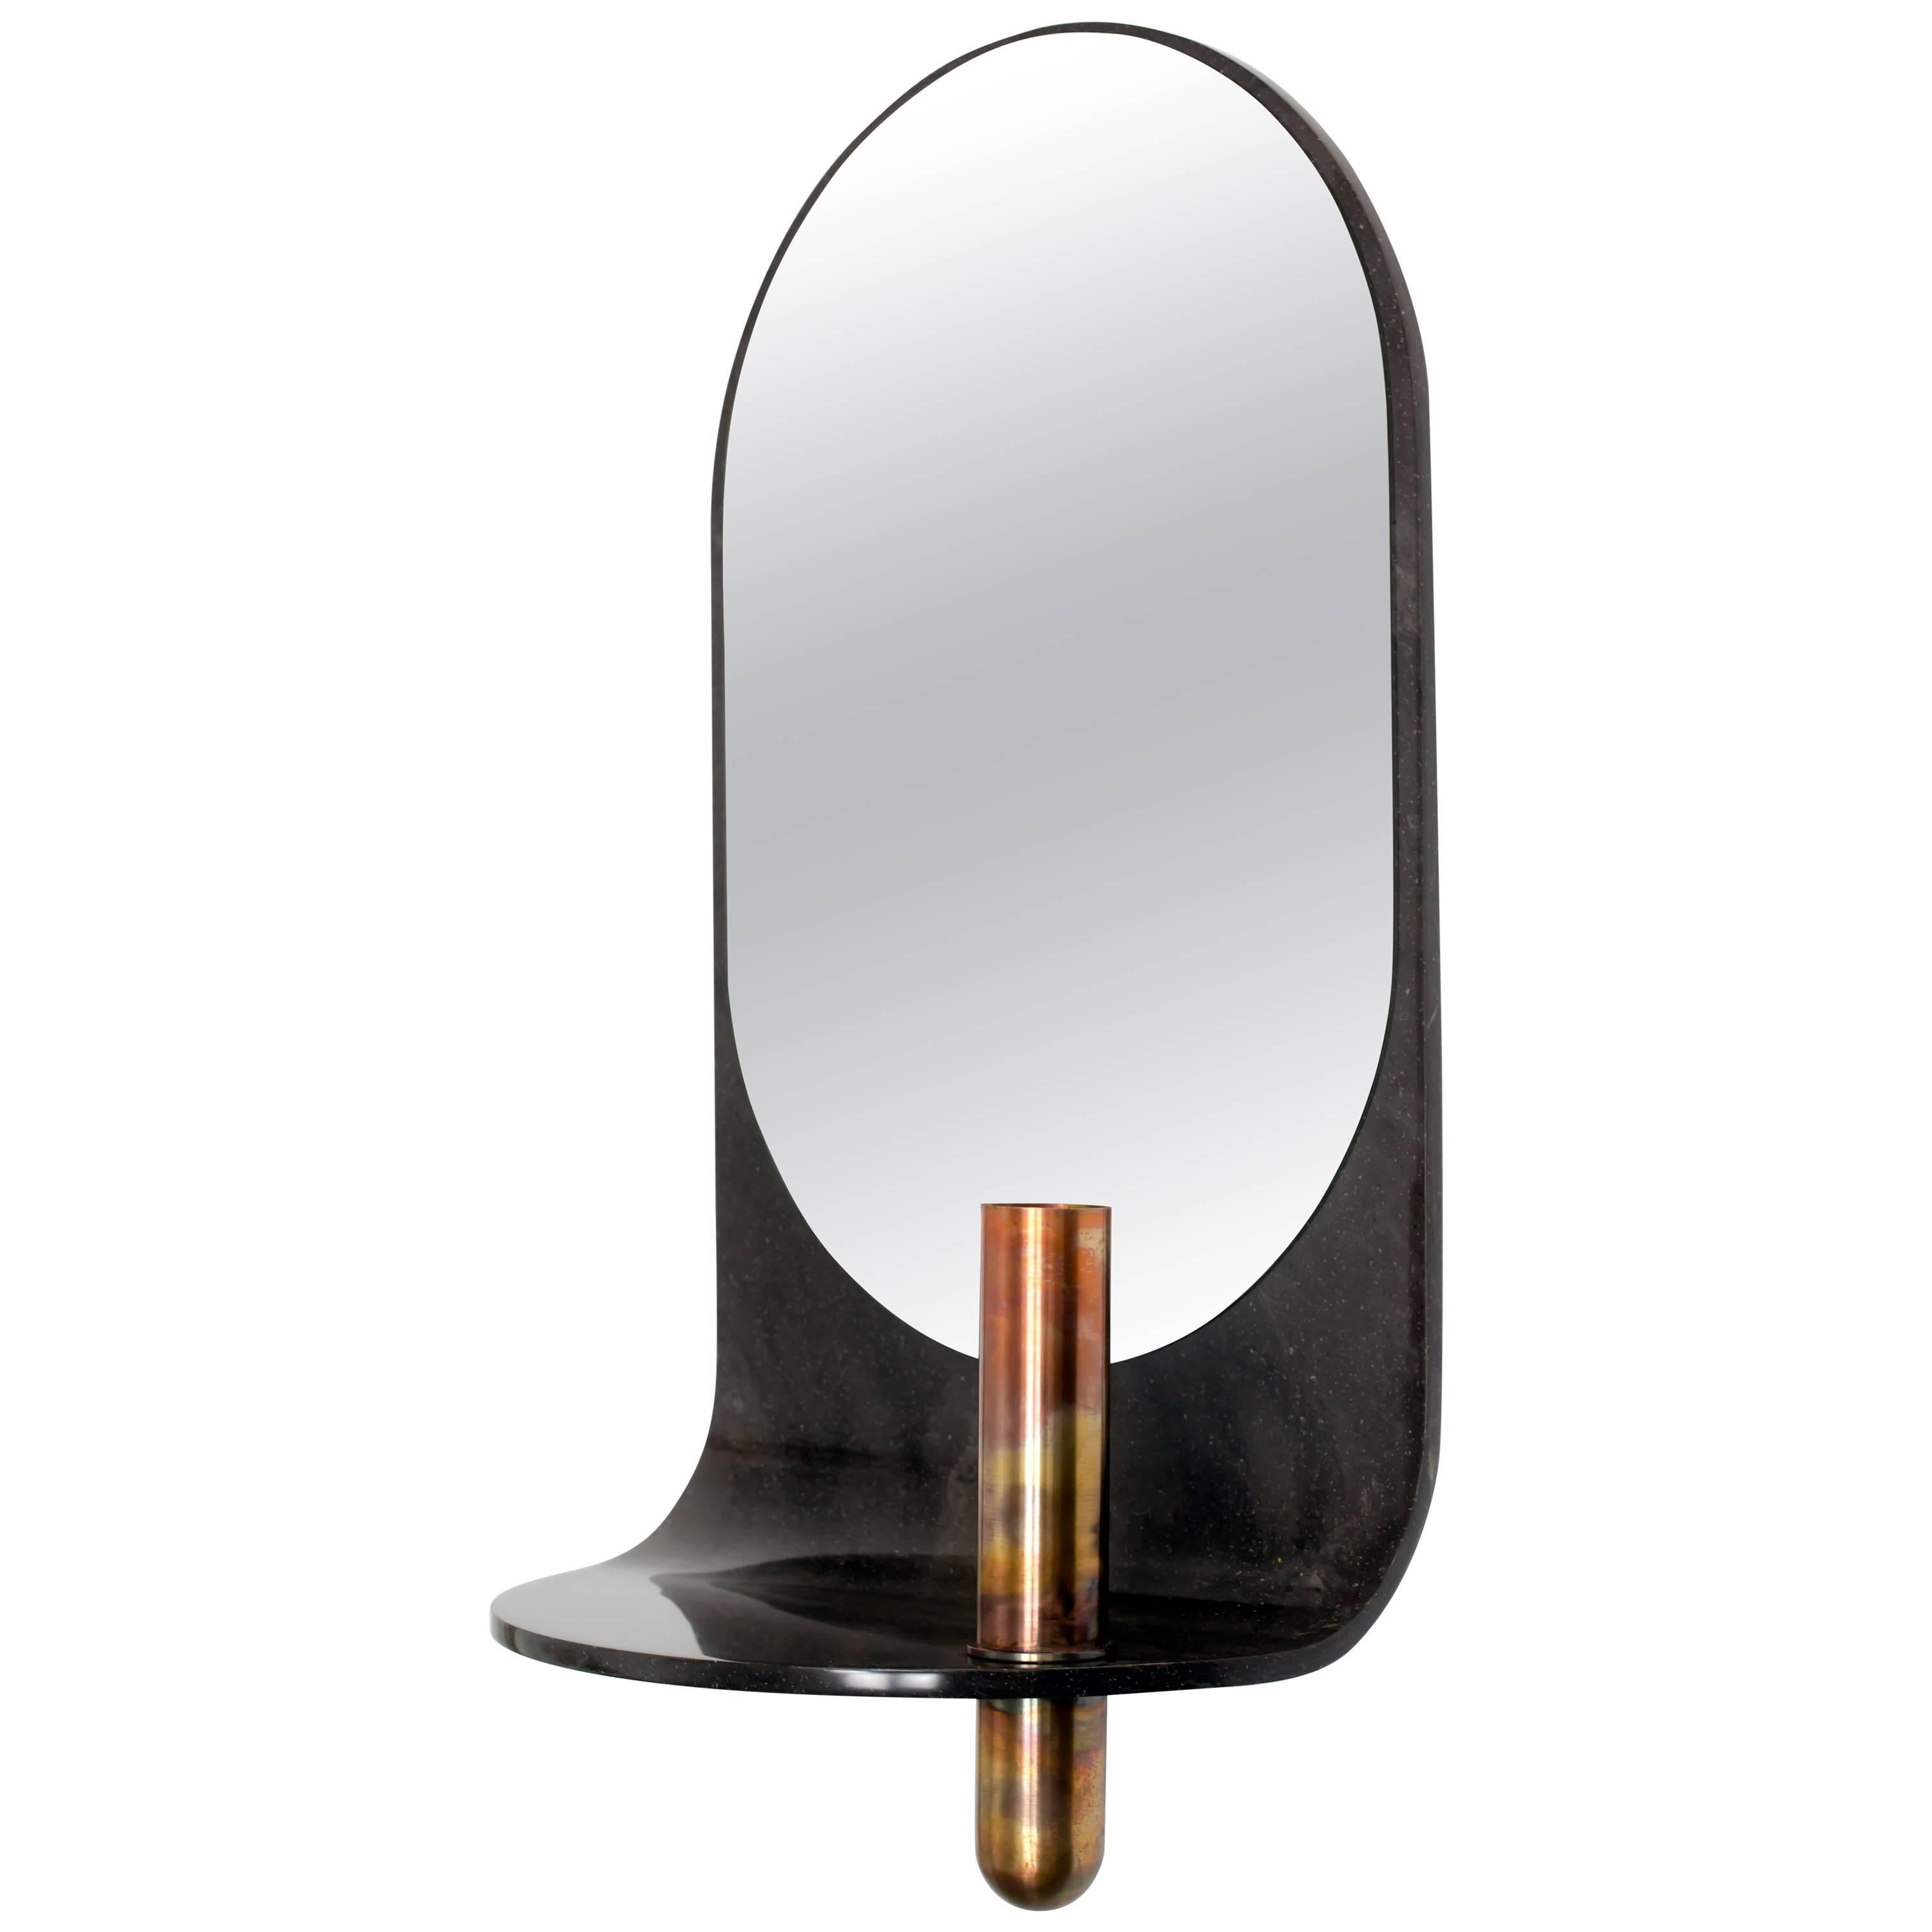 Dark Stone Wall Mirror with Integral Vase and Shelf by Birnam Wood Studio For Sale